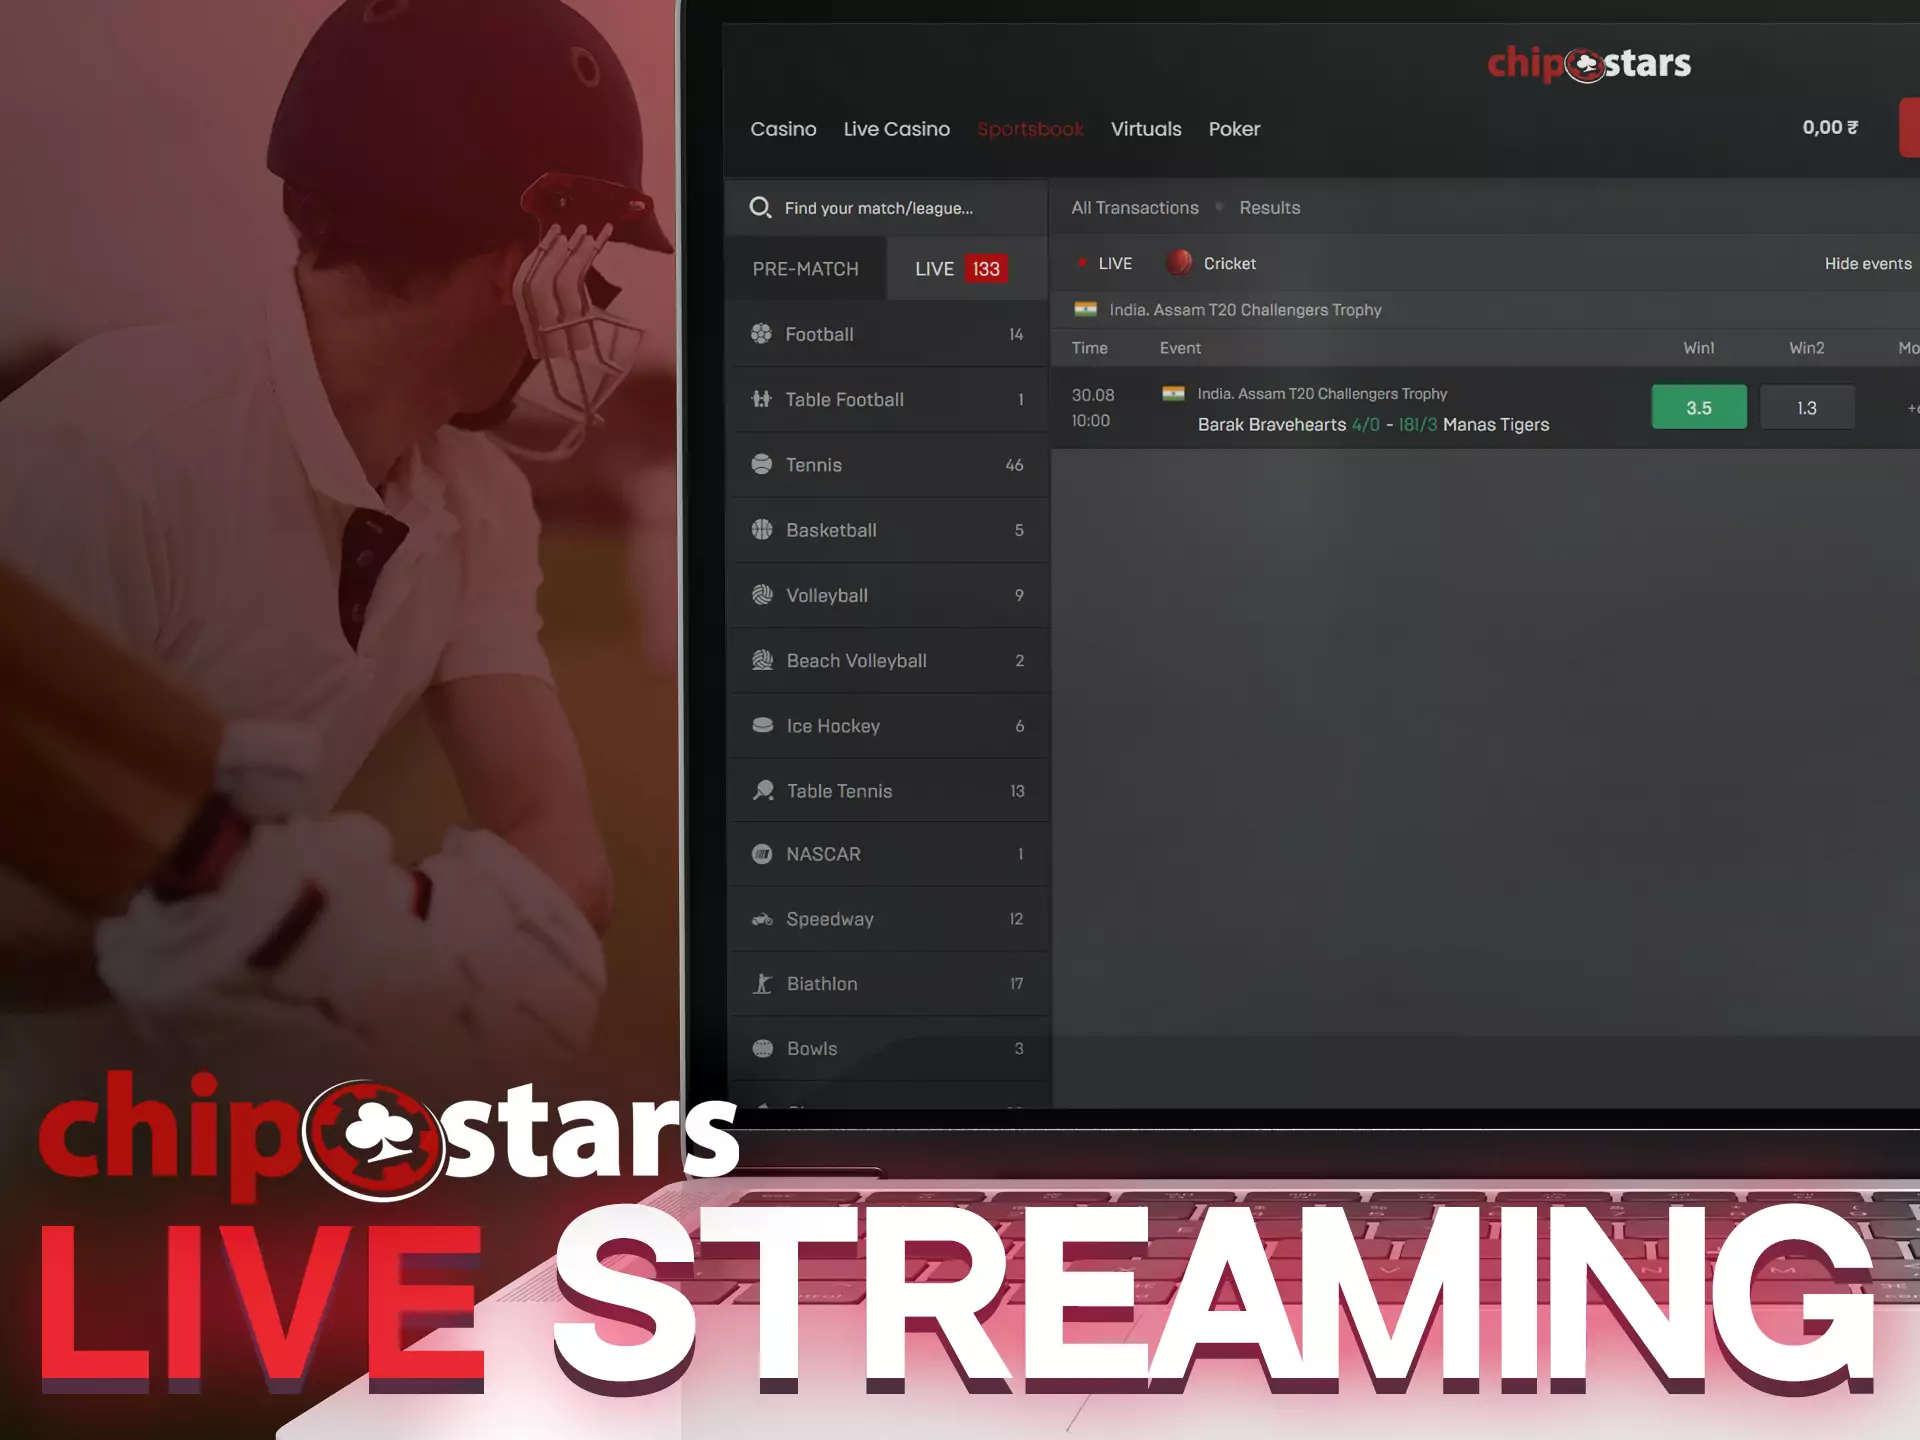 Follow a match right on the Chipstars site in the Live section.